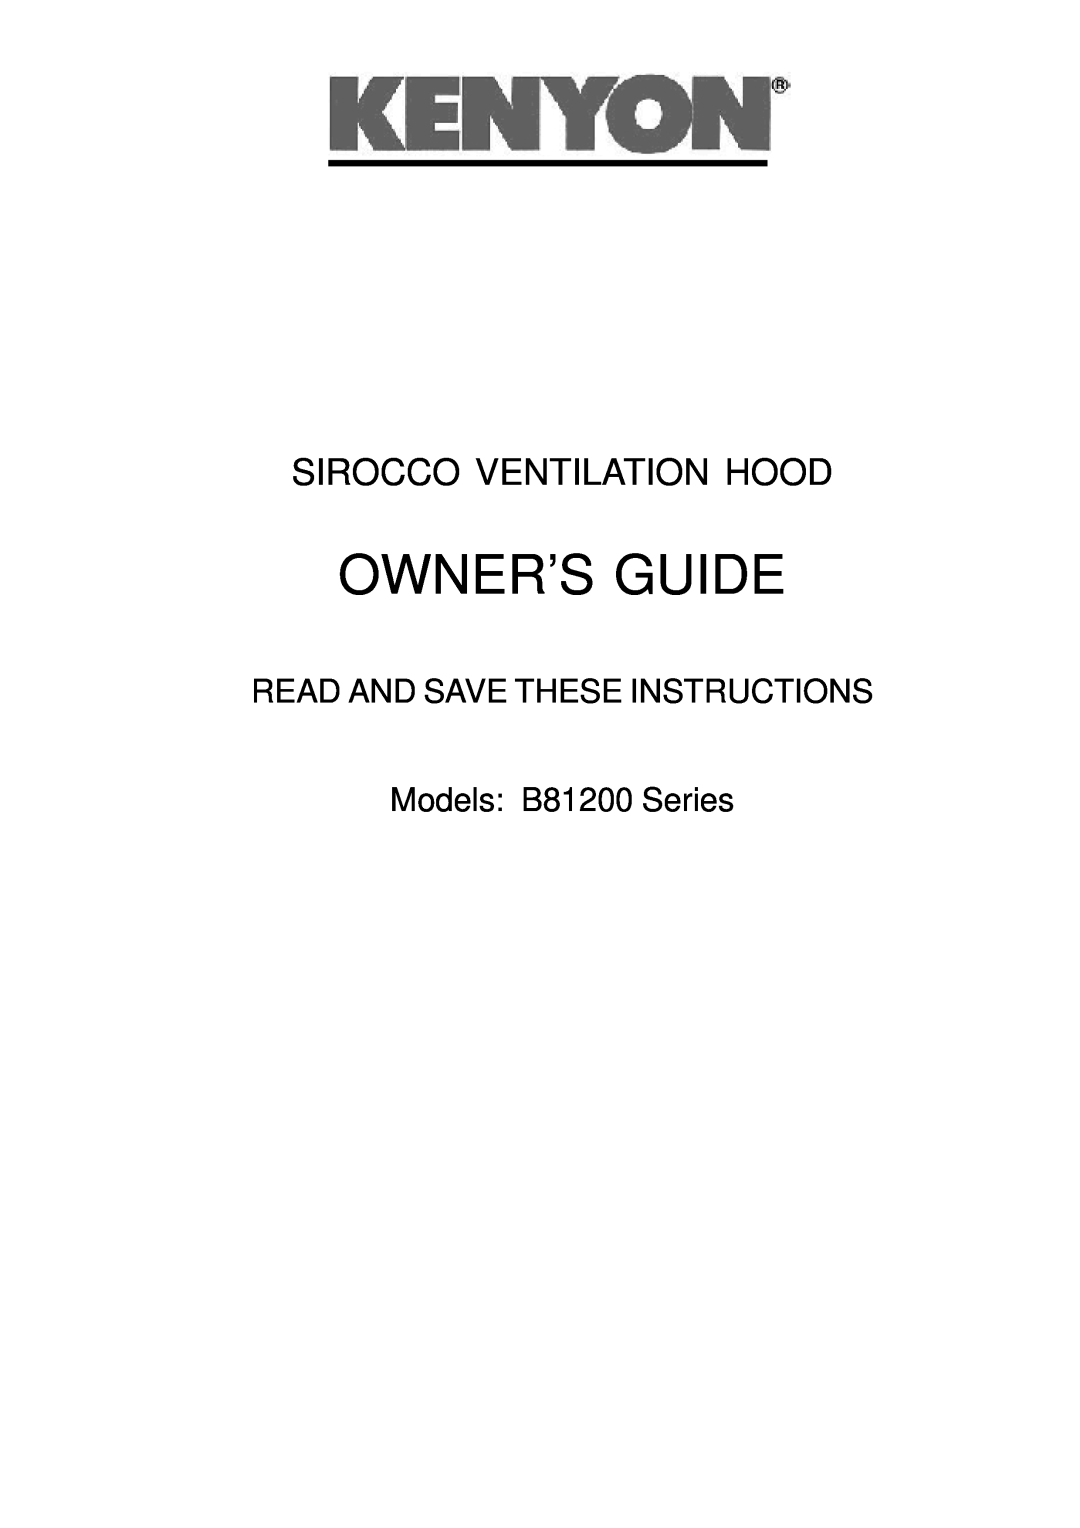 Kenyon manual Owner’S Guide, Sirocco Ventilation Hood, READ AND SAVE THESE INSTRUCTIONS Models B81200 Series 